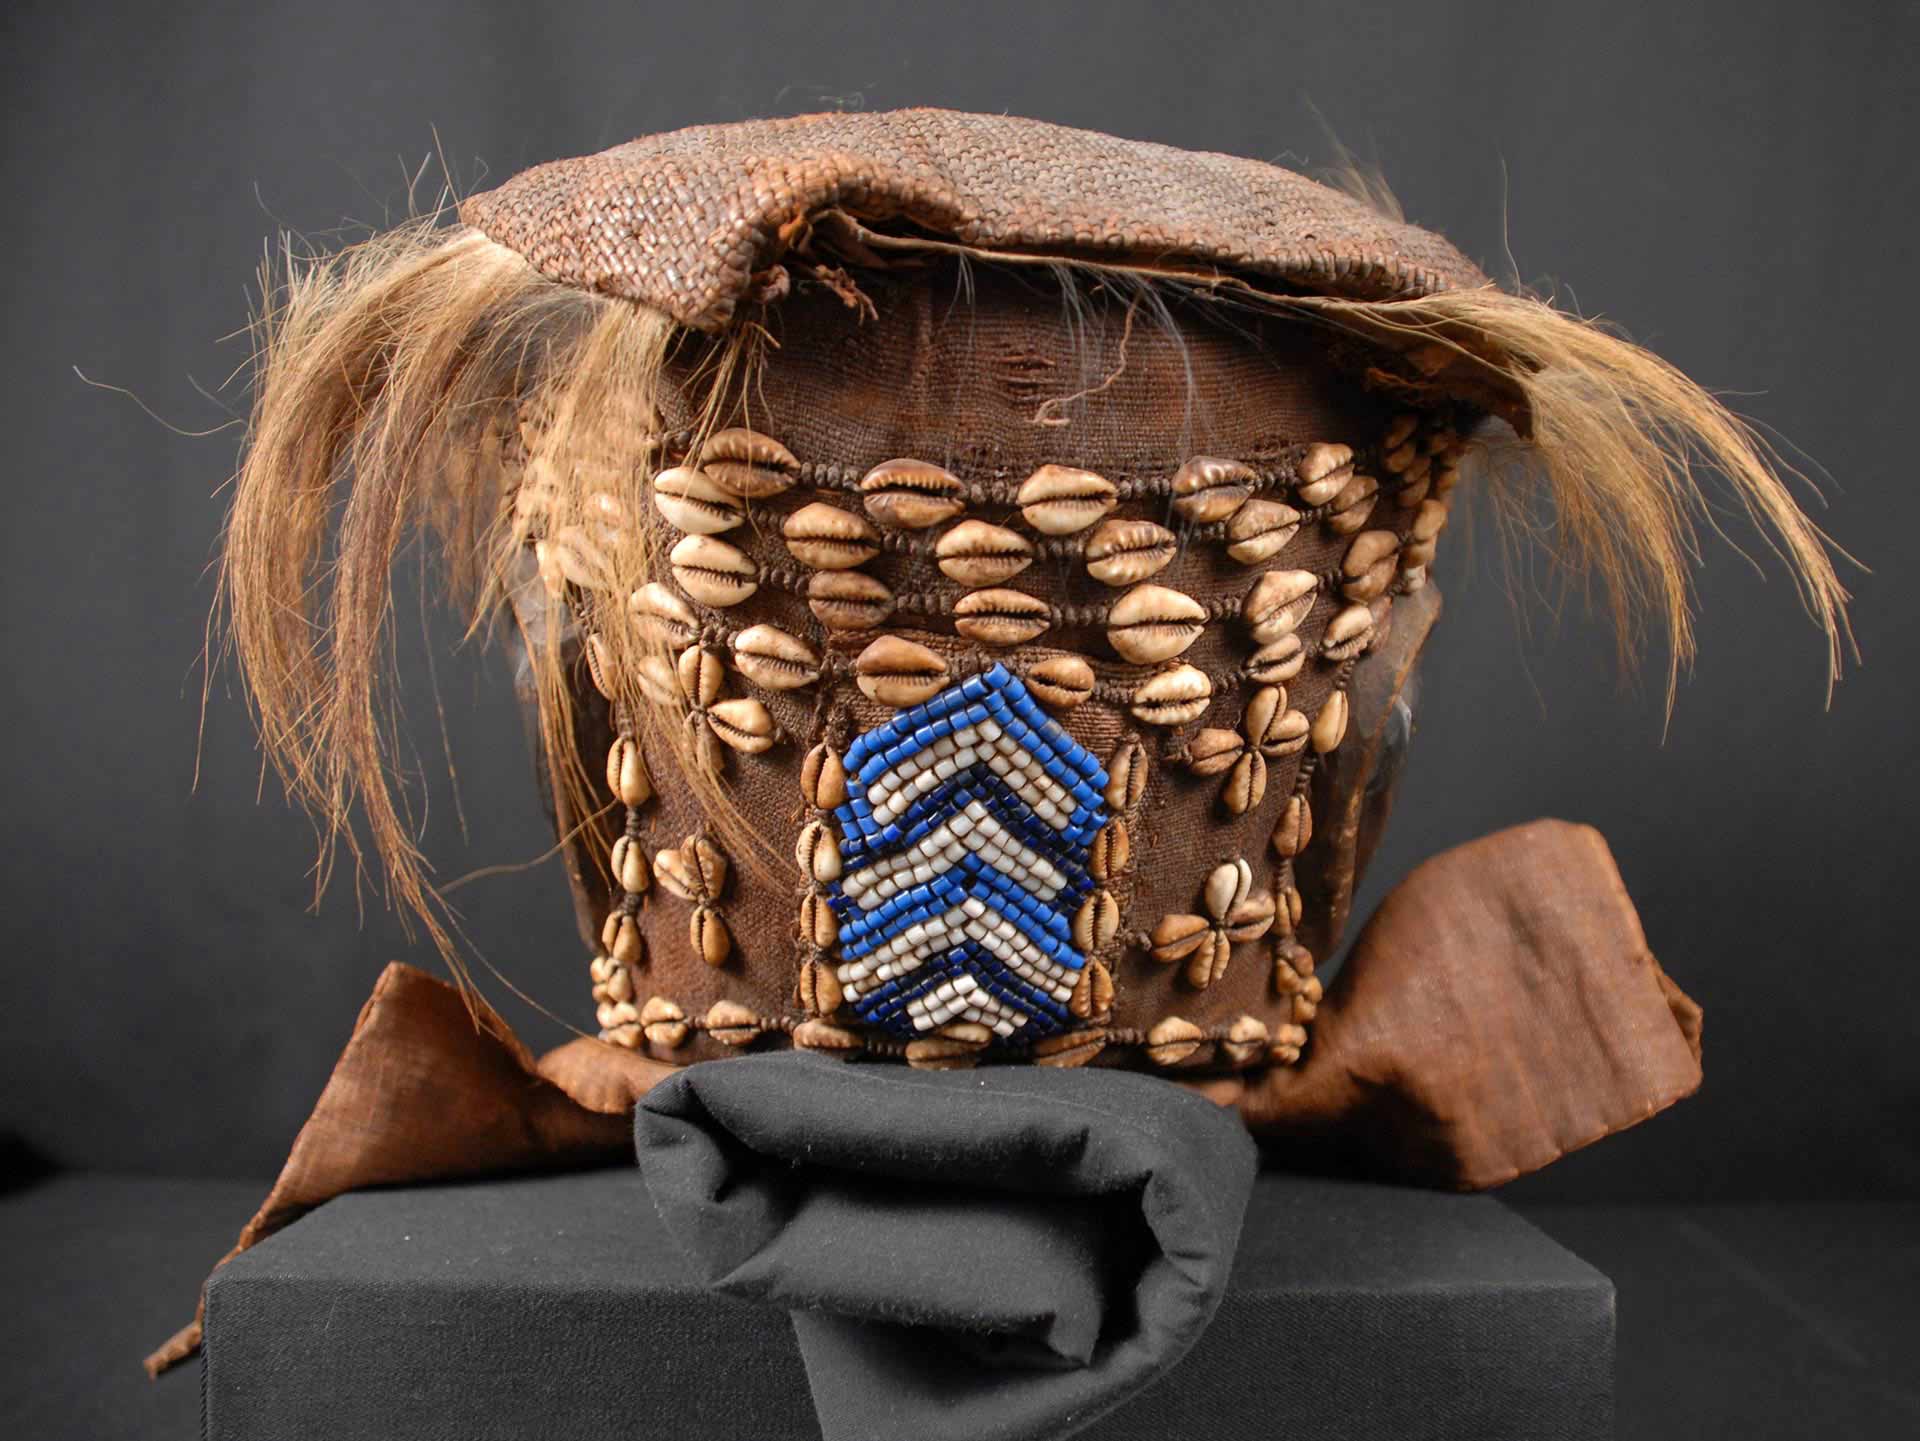 Burlap cloth attached to top of head, hair coming from edges of burlap, colored beads attached